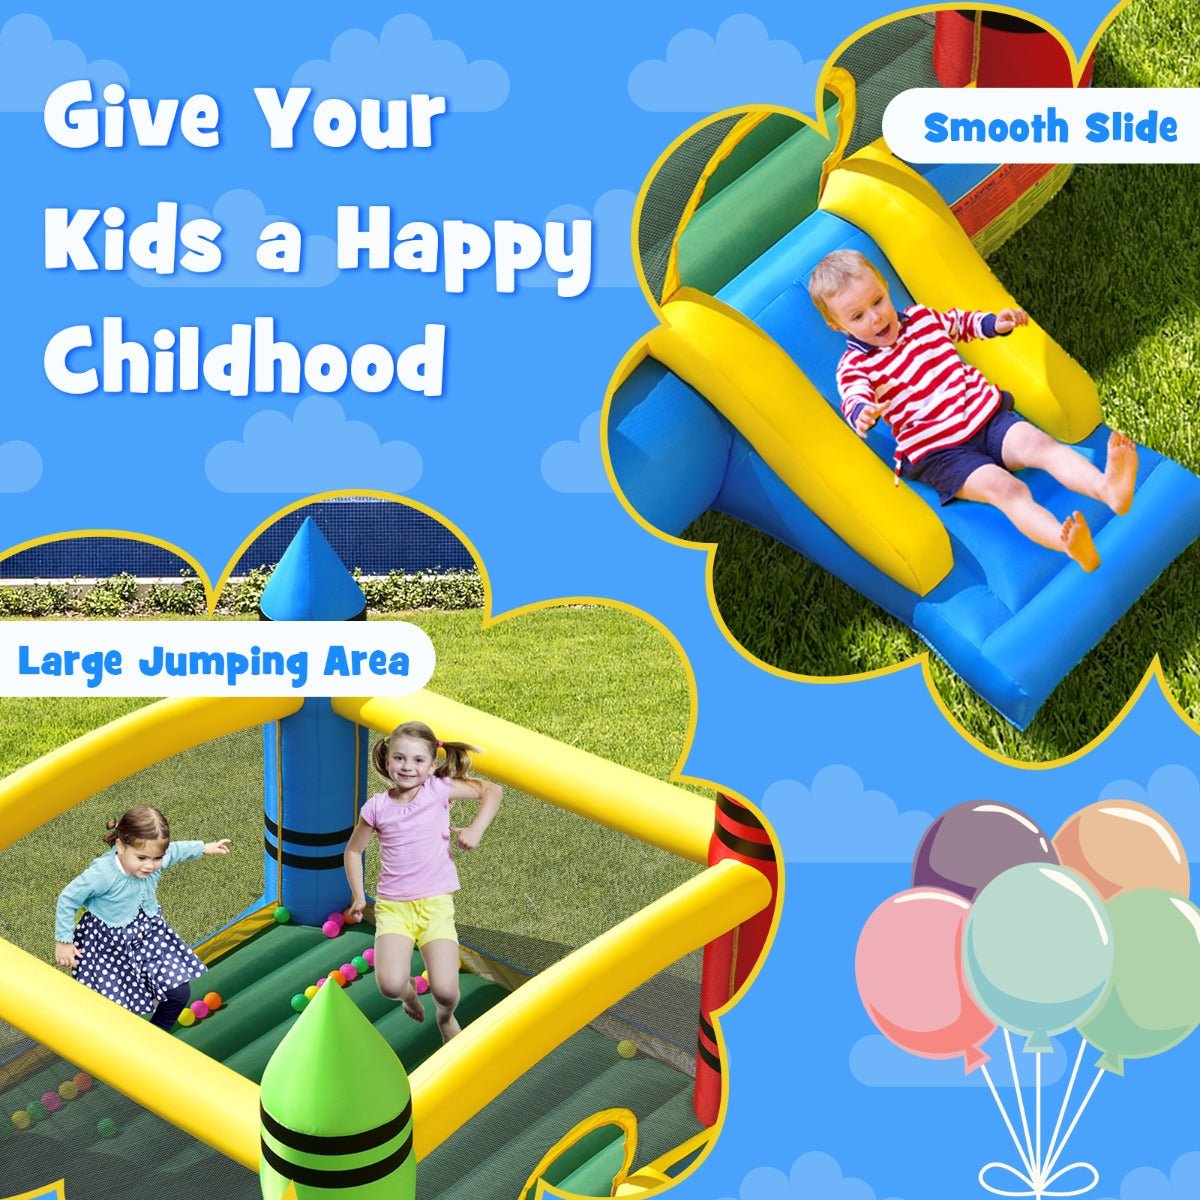 Kids Jumping Castle Bouncer - Slide, Bounce, and Explore Outdoors